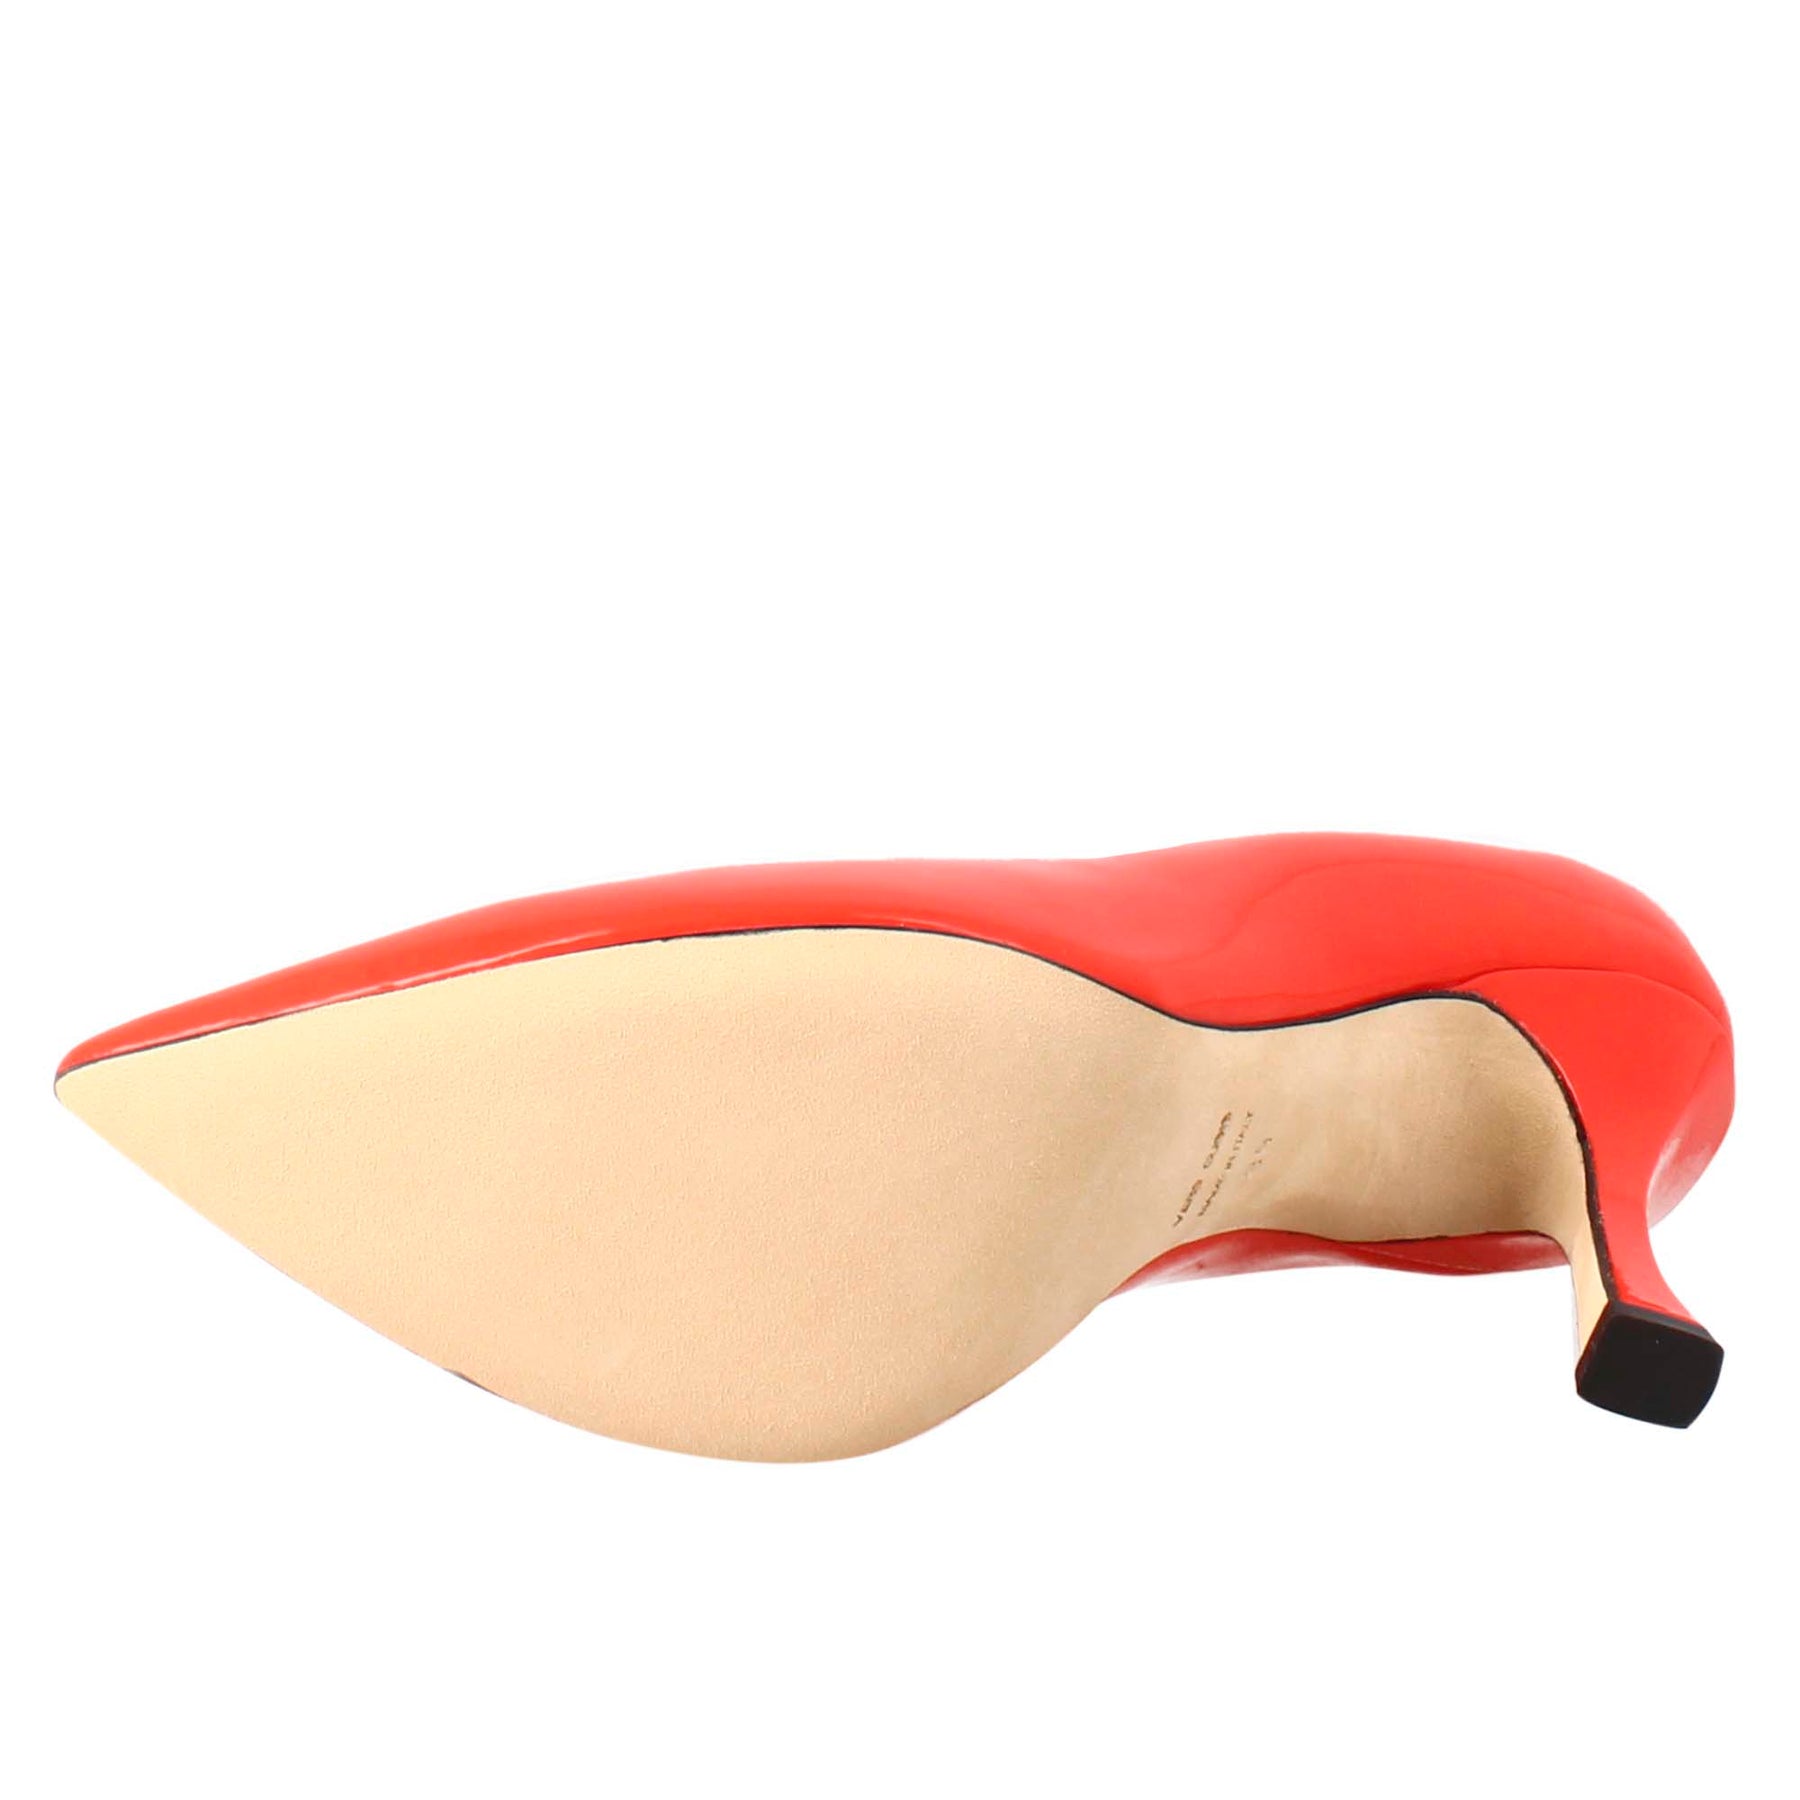 Woman's décolleté in pointed red patent leather